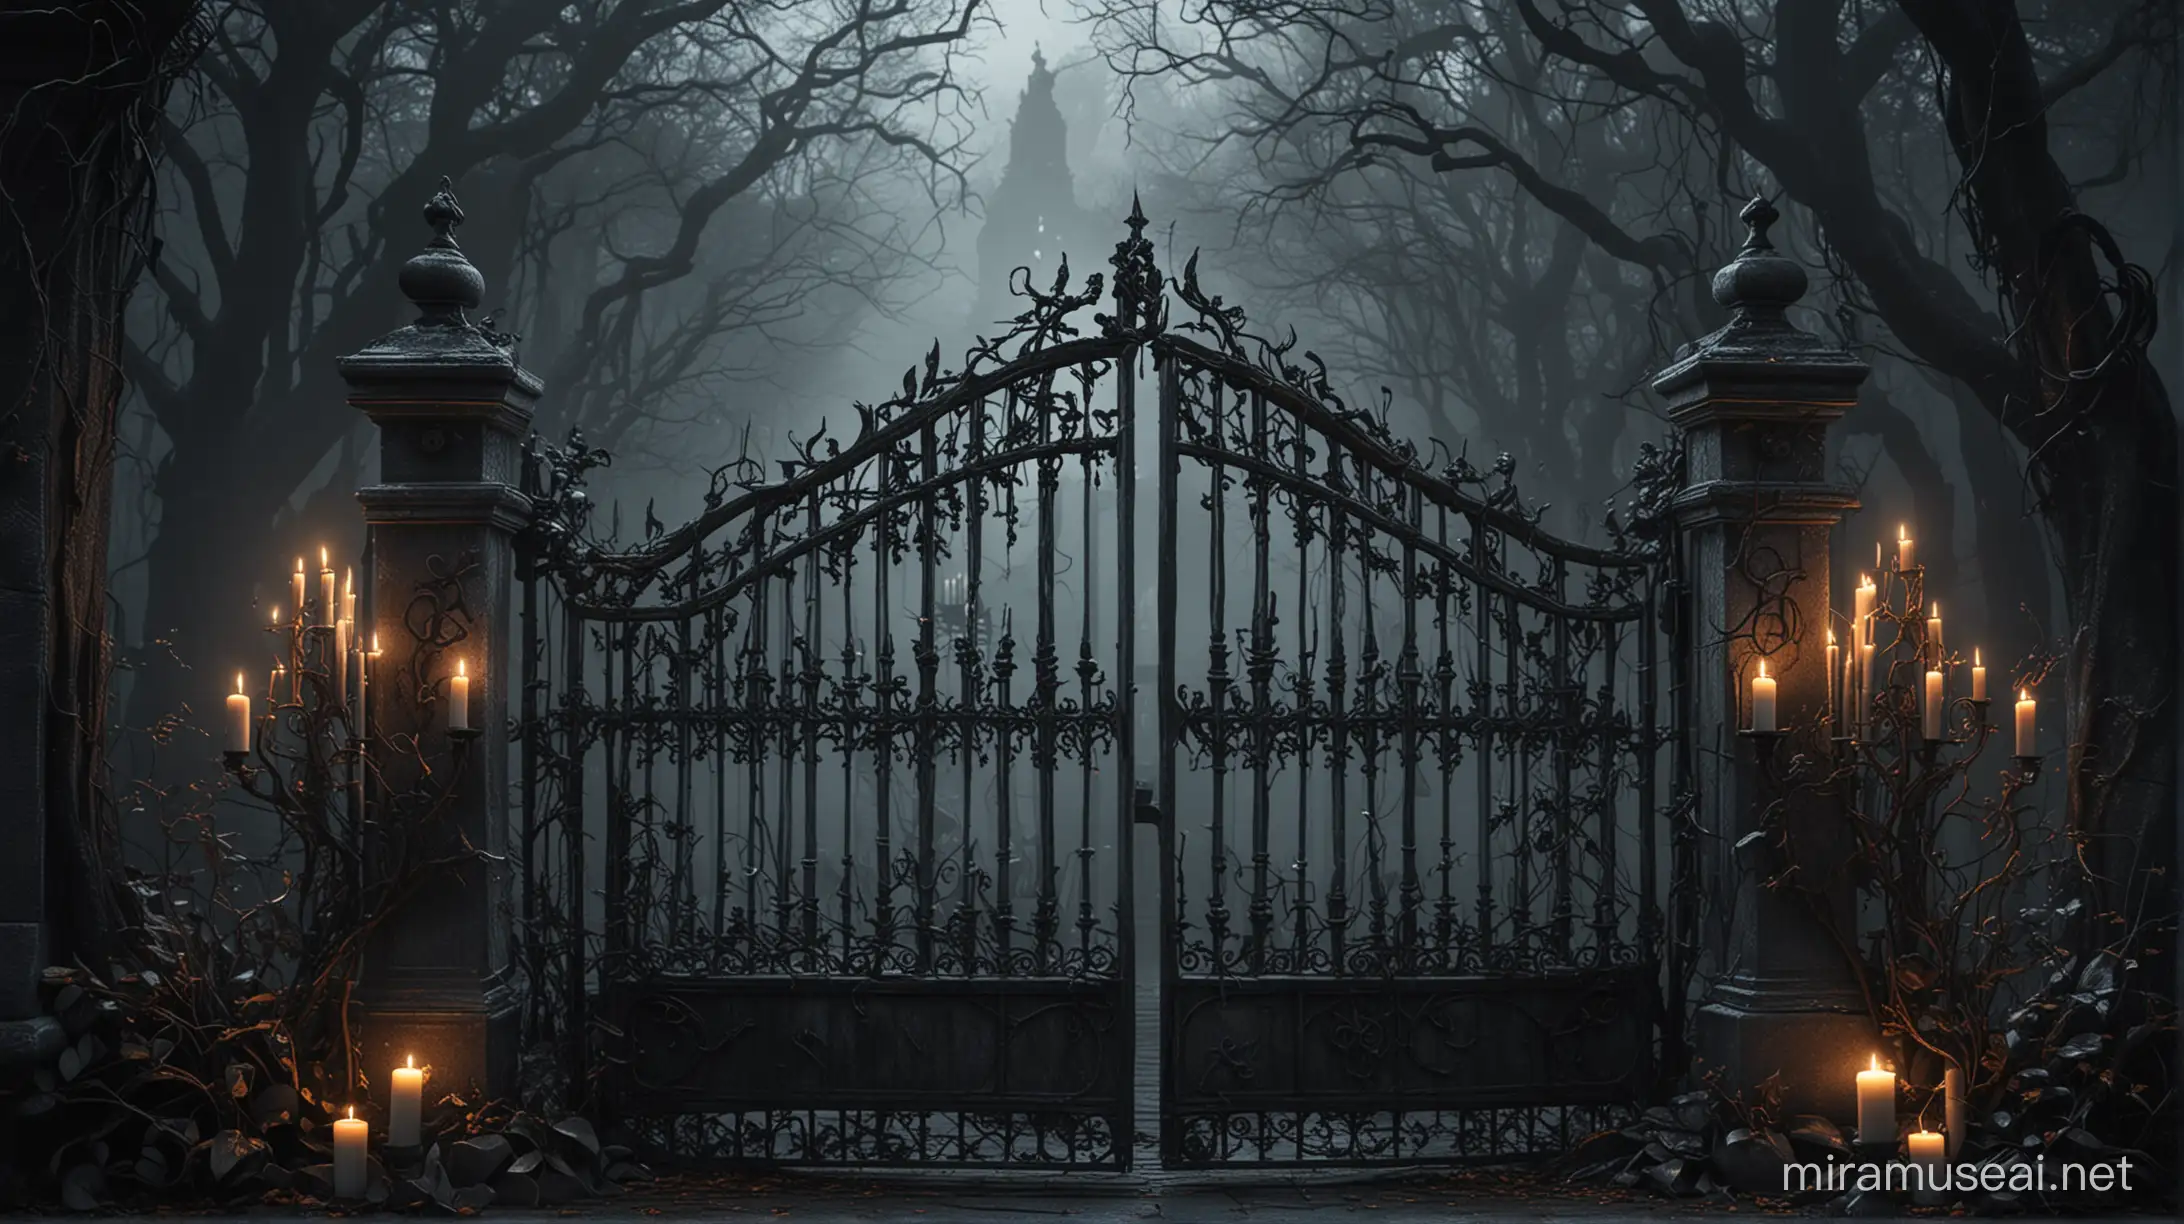 Dark enchanted fantasy cemetary gothic gate with candles and creepy vines